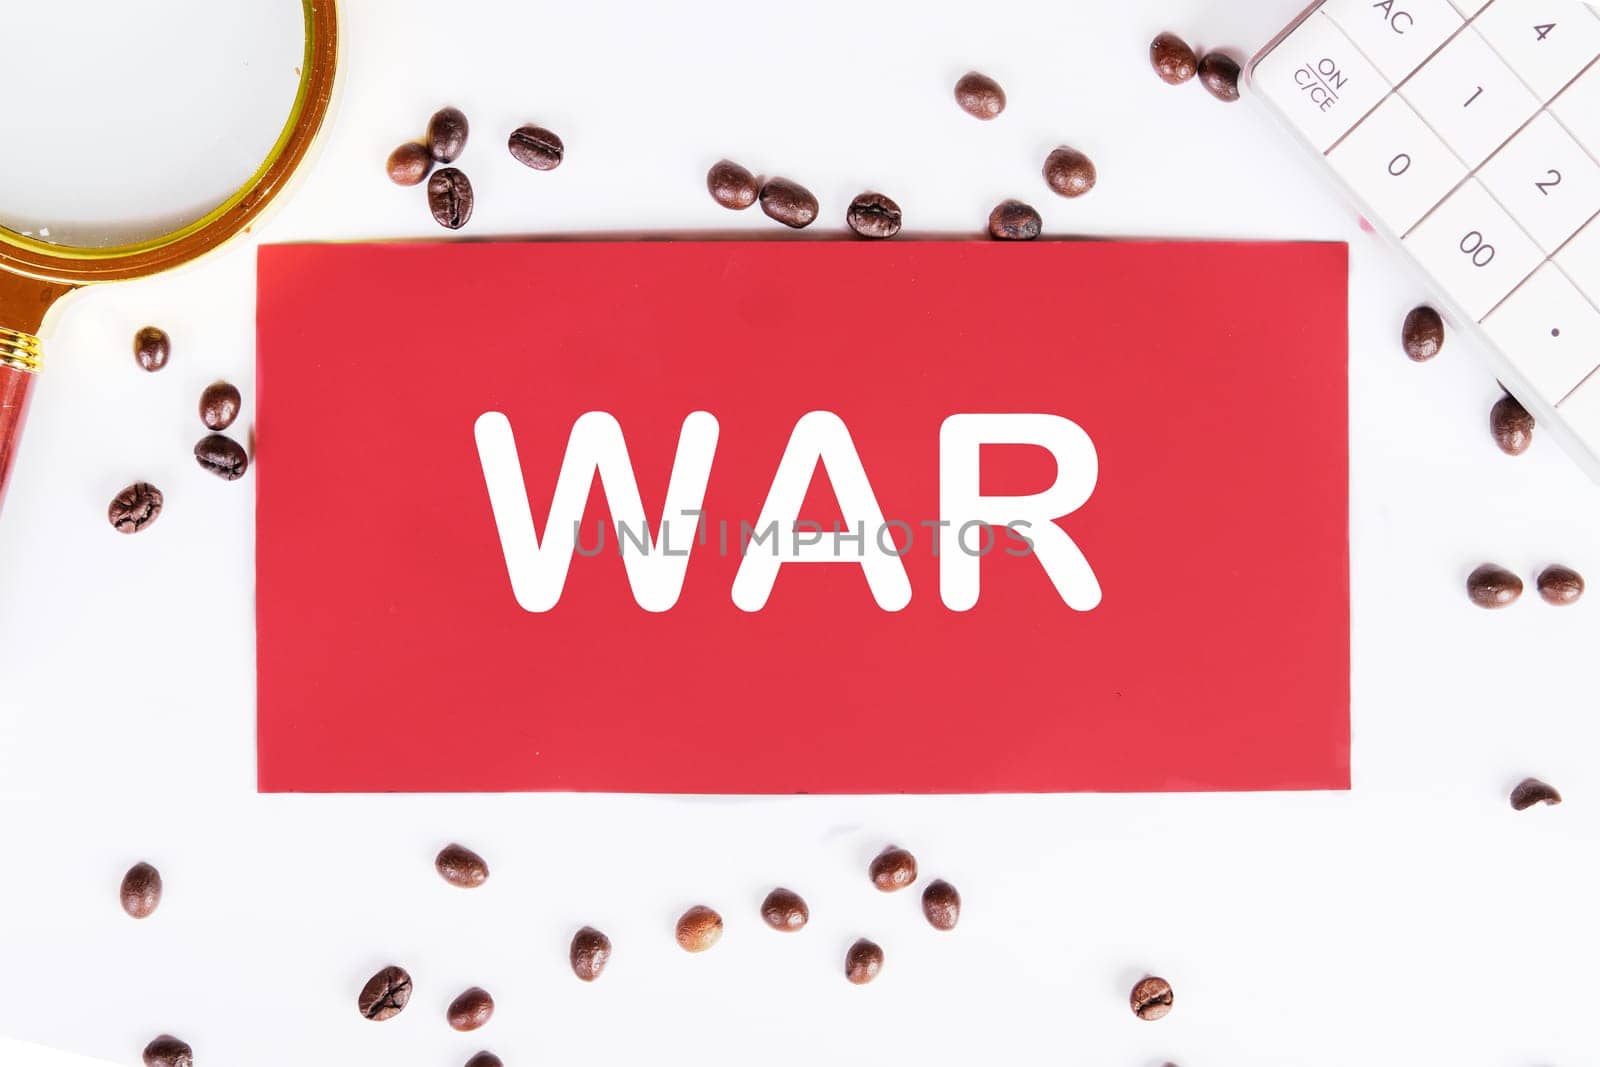 WAR writing on a red card on a white background with coffee beans and a magnifying glass